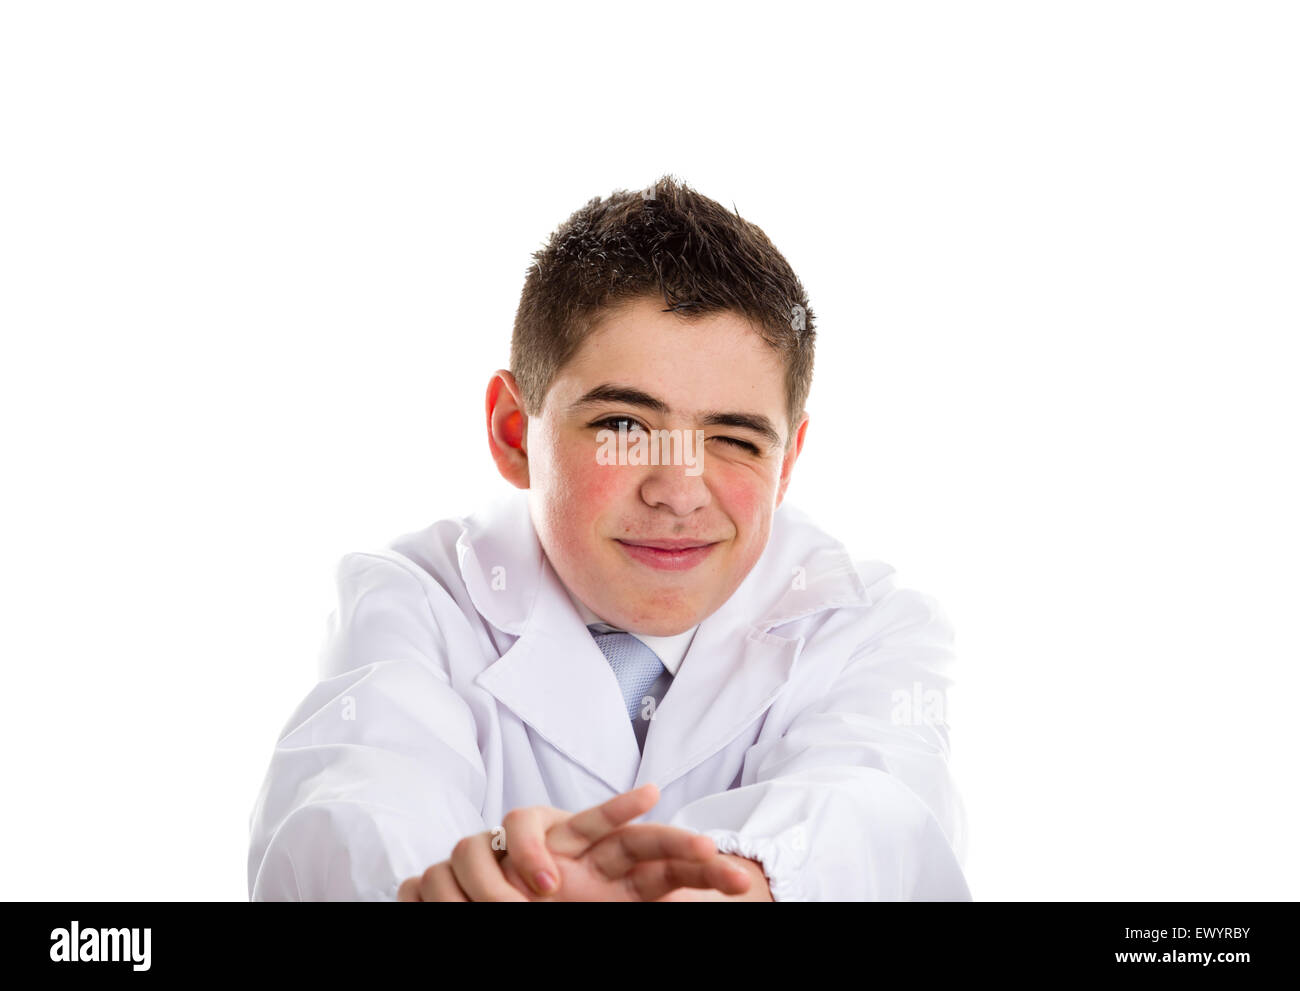 A boy doctor in white coat and blue tie helps to feel medicine more friendly: he is stretching his arms.. His acne skin has not ben retouched Stock Photo